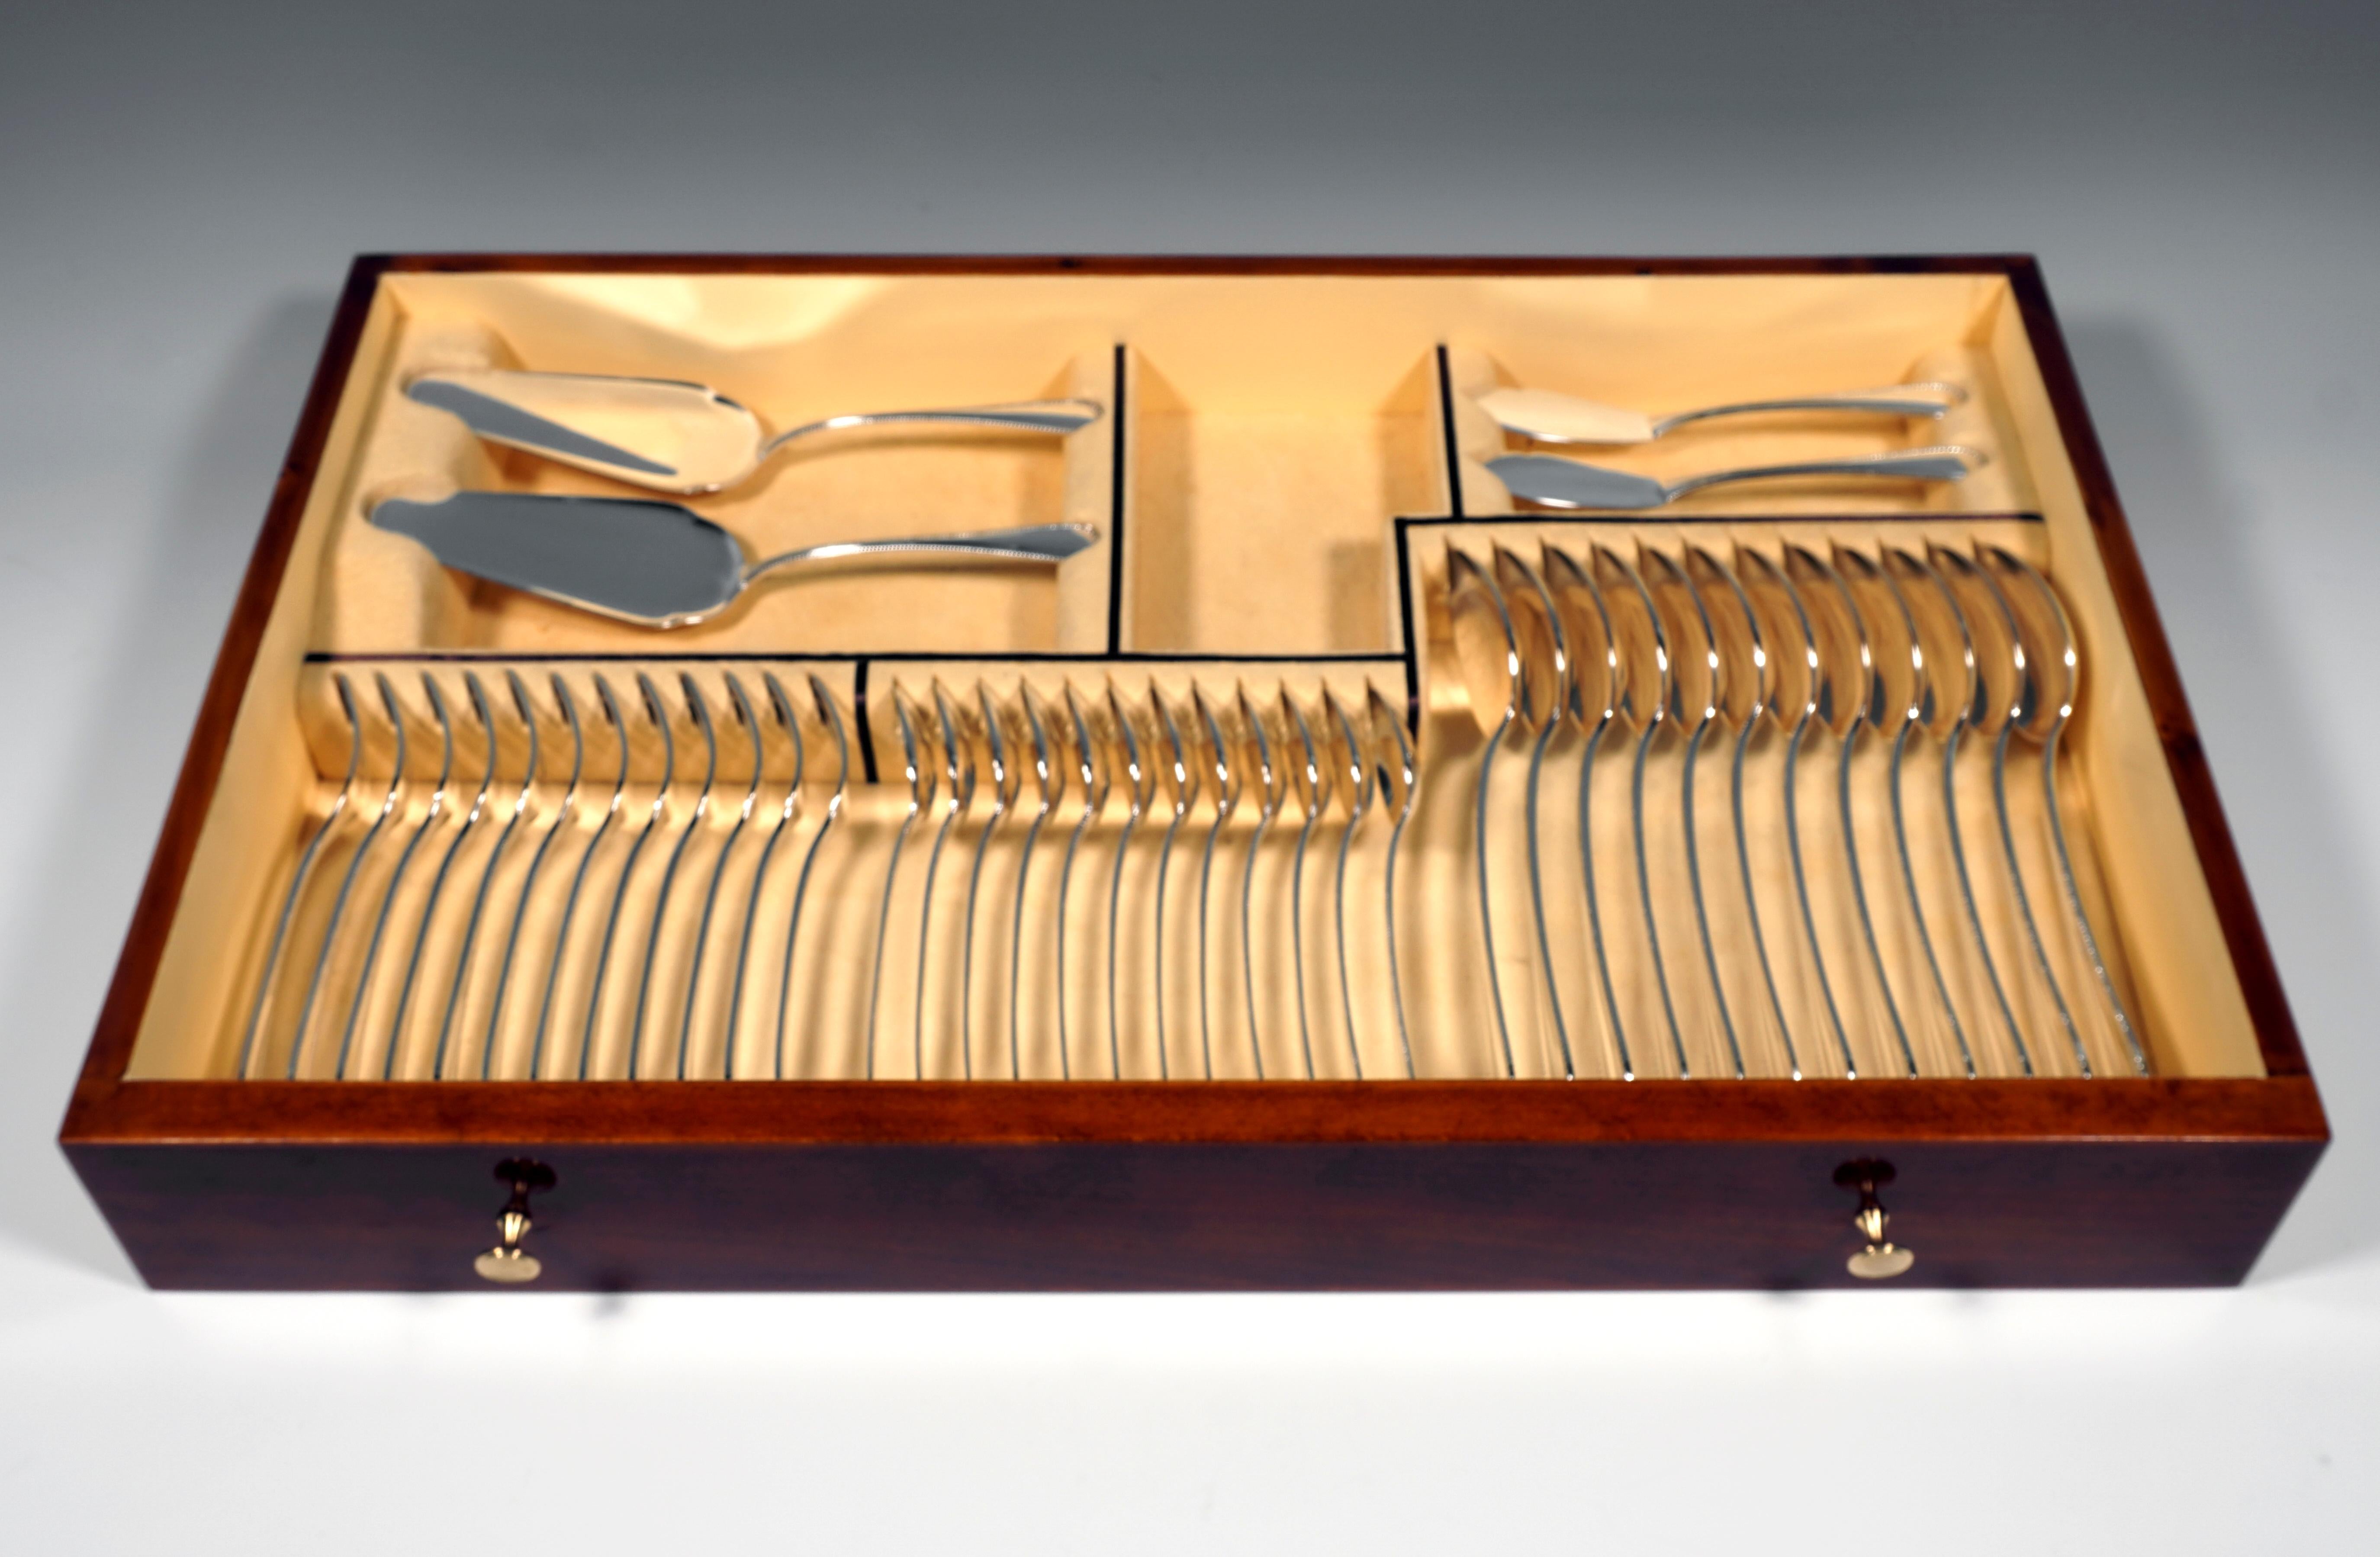 Early 20th Century Silver Cutlery Set for 12 People in Showcase by Wilkens & Sons Germany, ca  1900